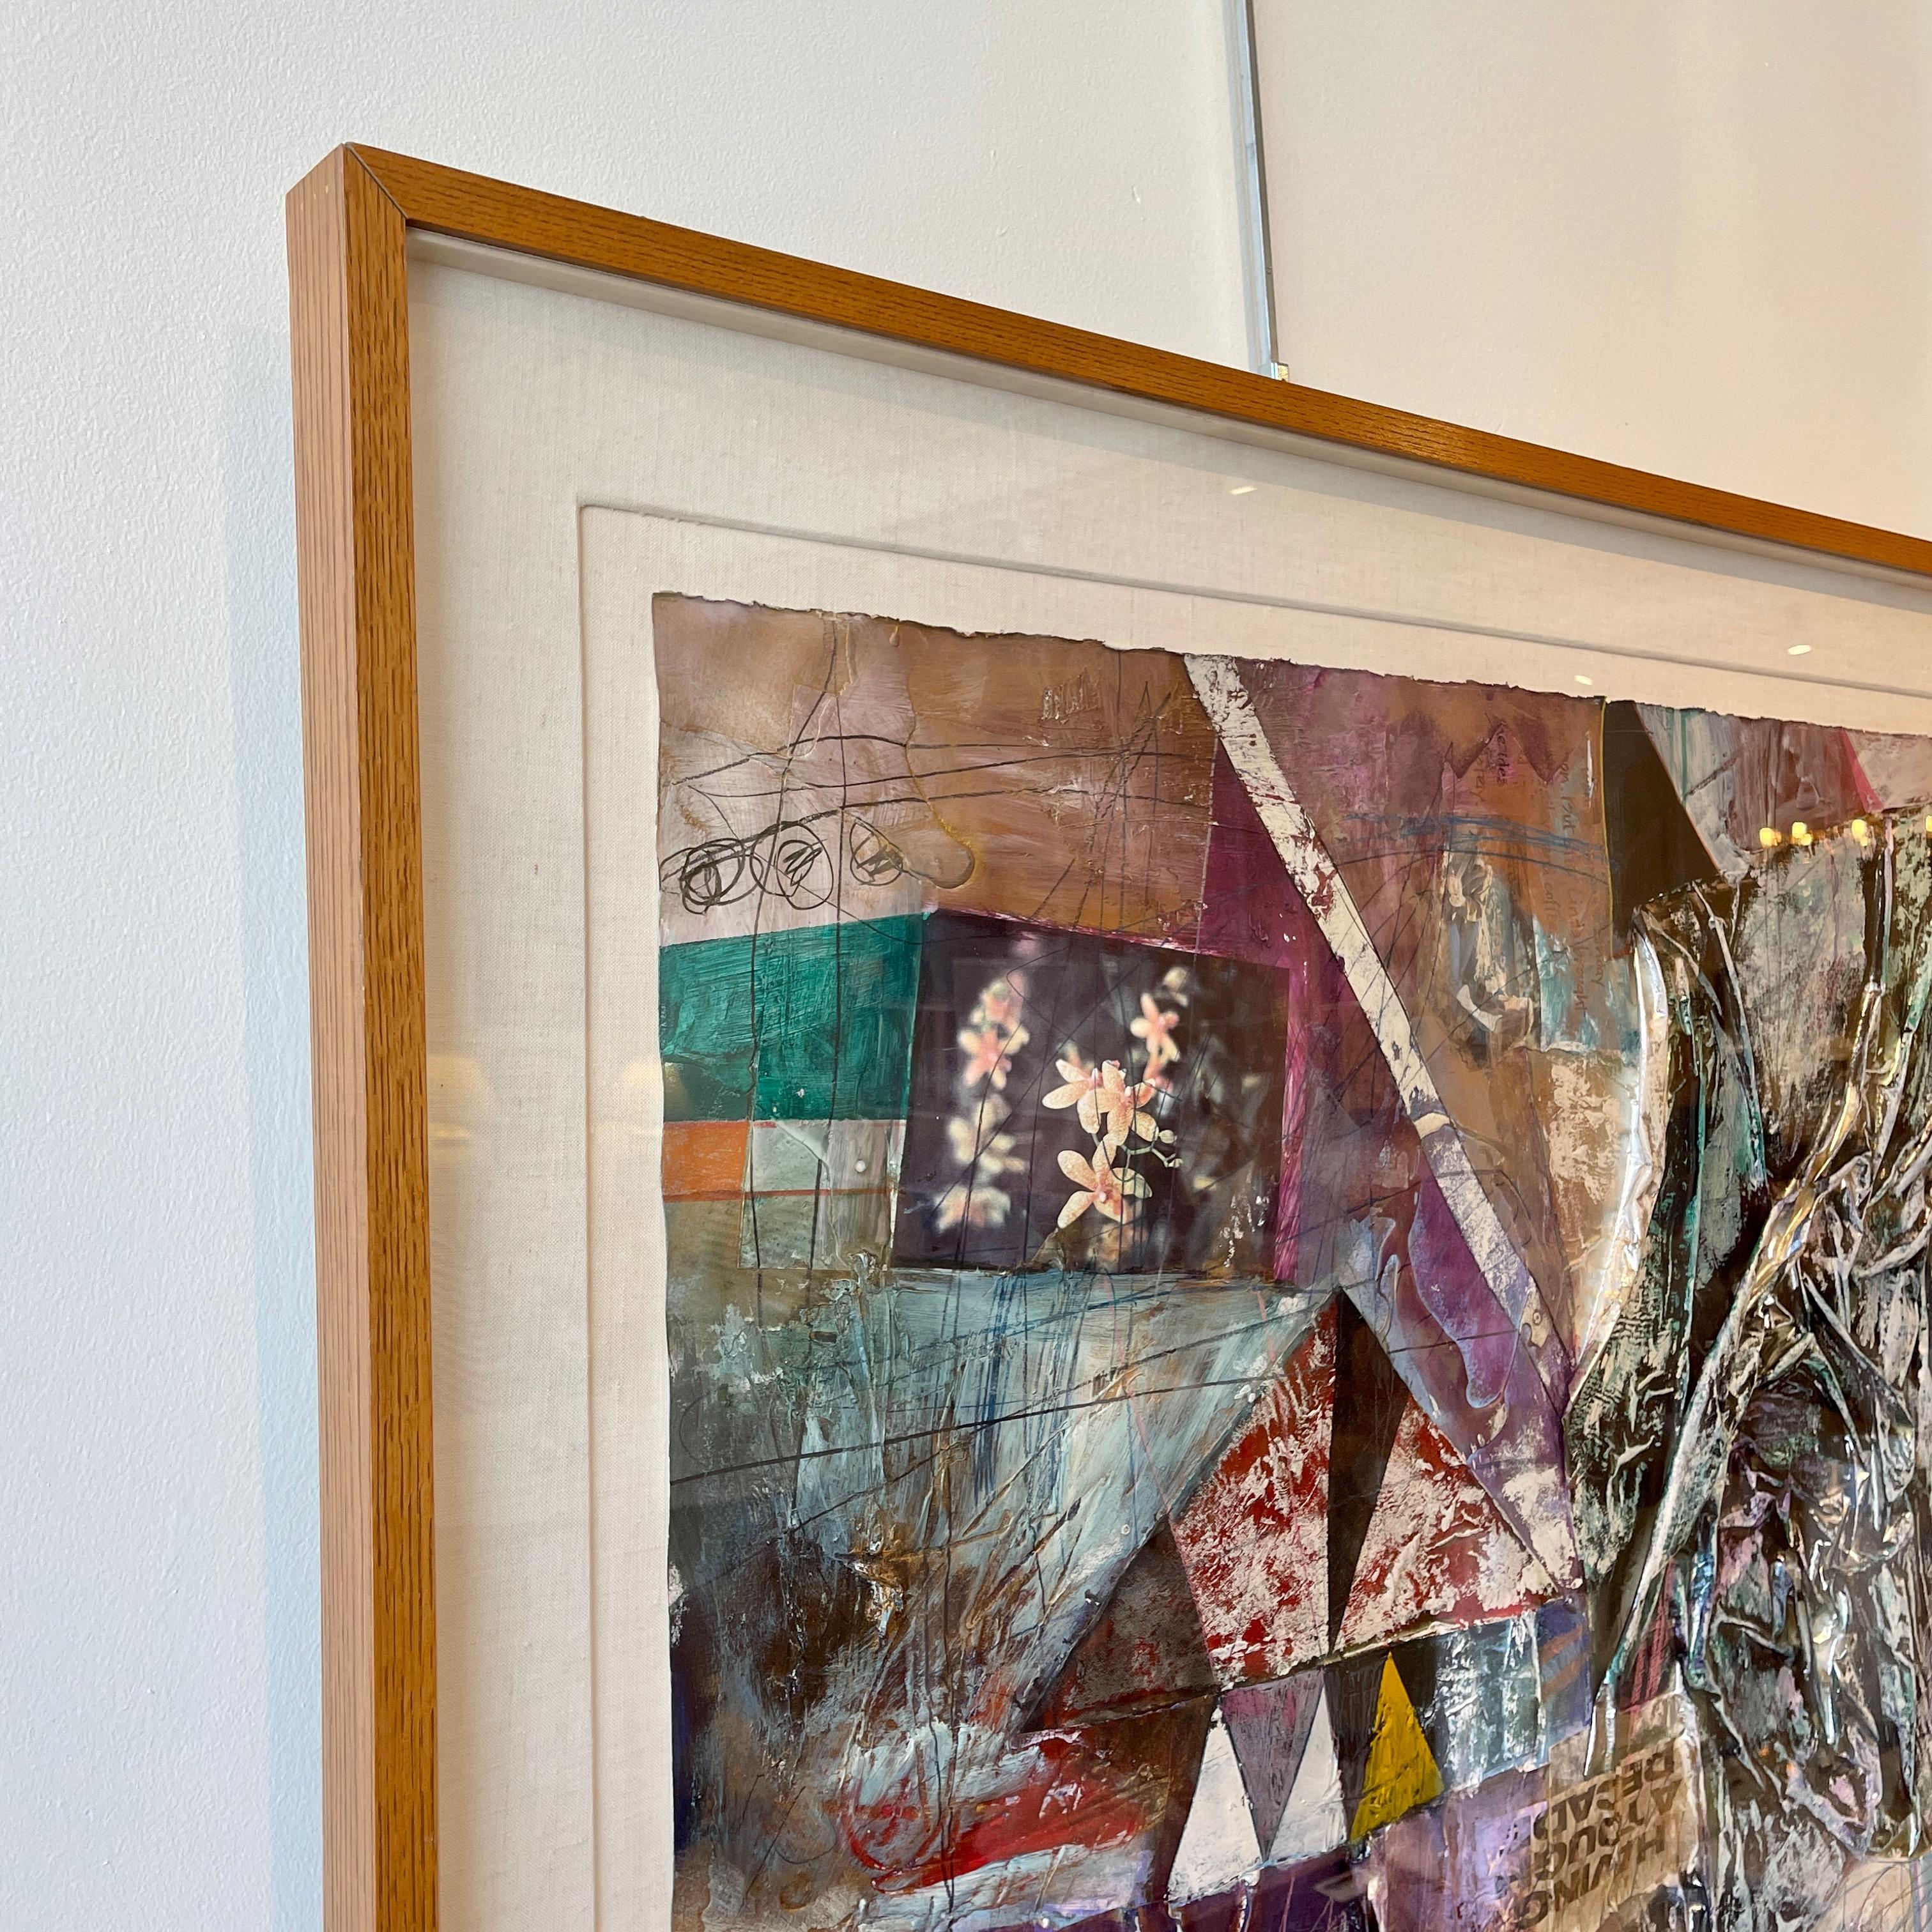 Large scale mixed media postmodern collage by Patricia A. Beatty. Beautifully framed in a mahogany deep set shadow box style frame. Frame is 2.25